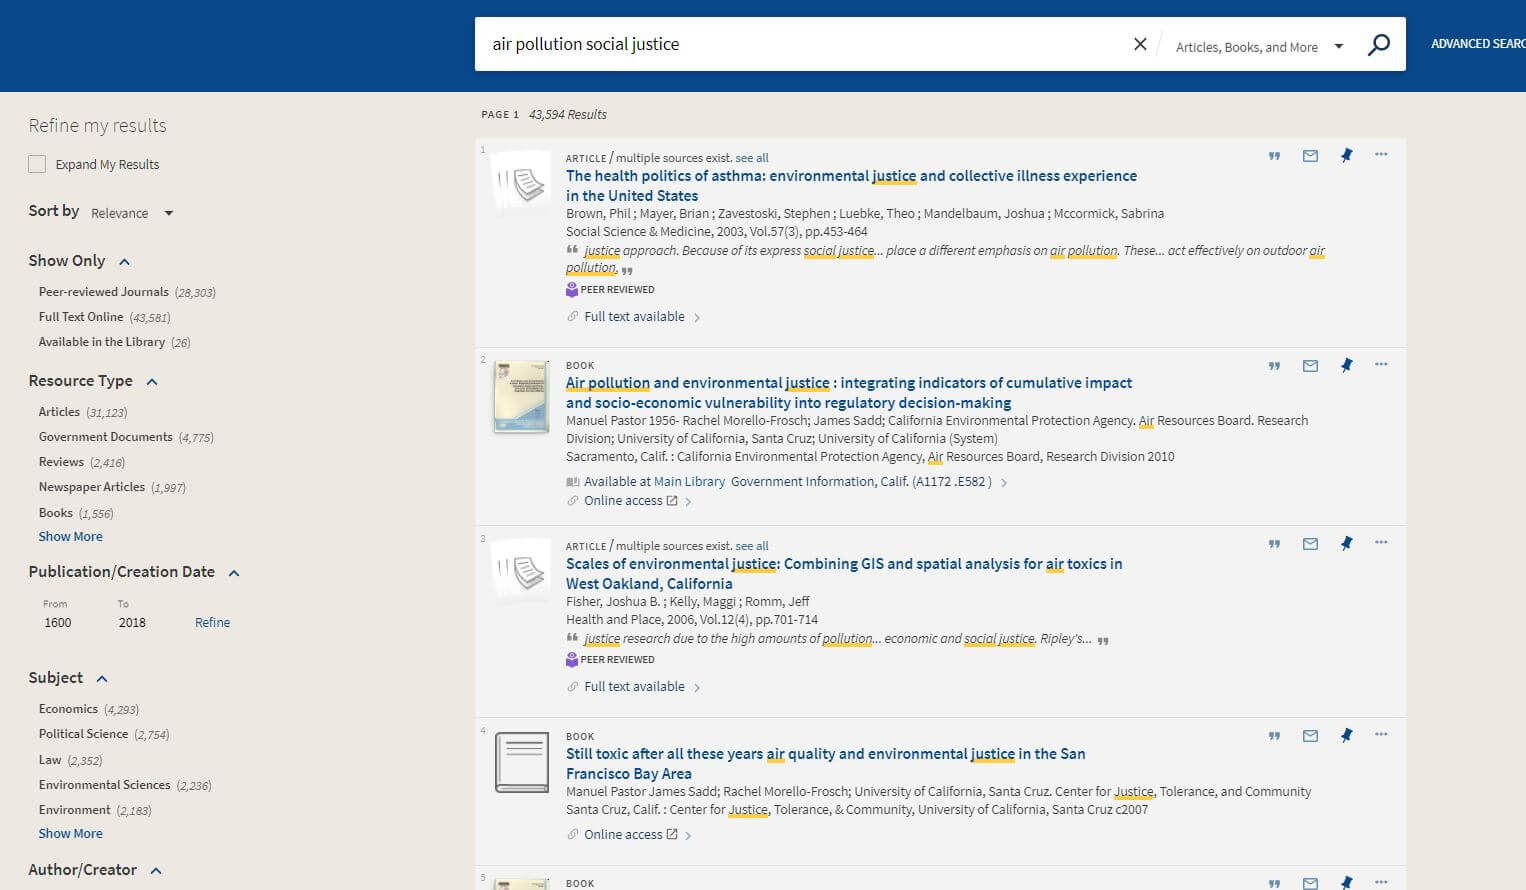 UCSB search results screenshot cropped w/o their branding